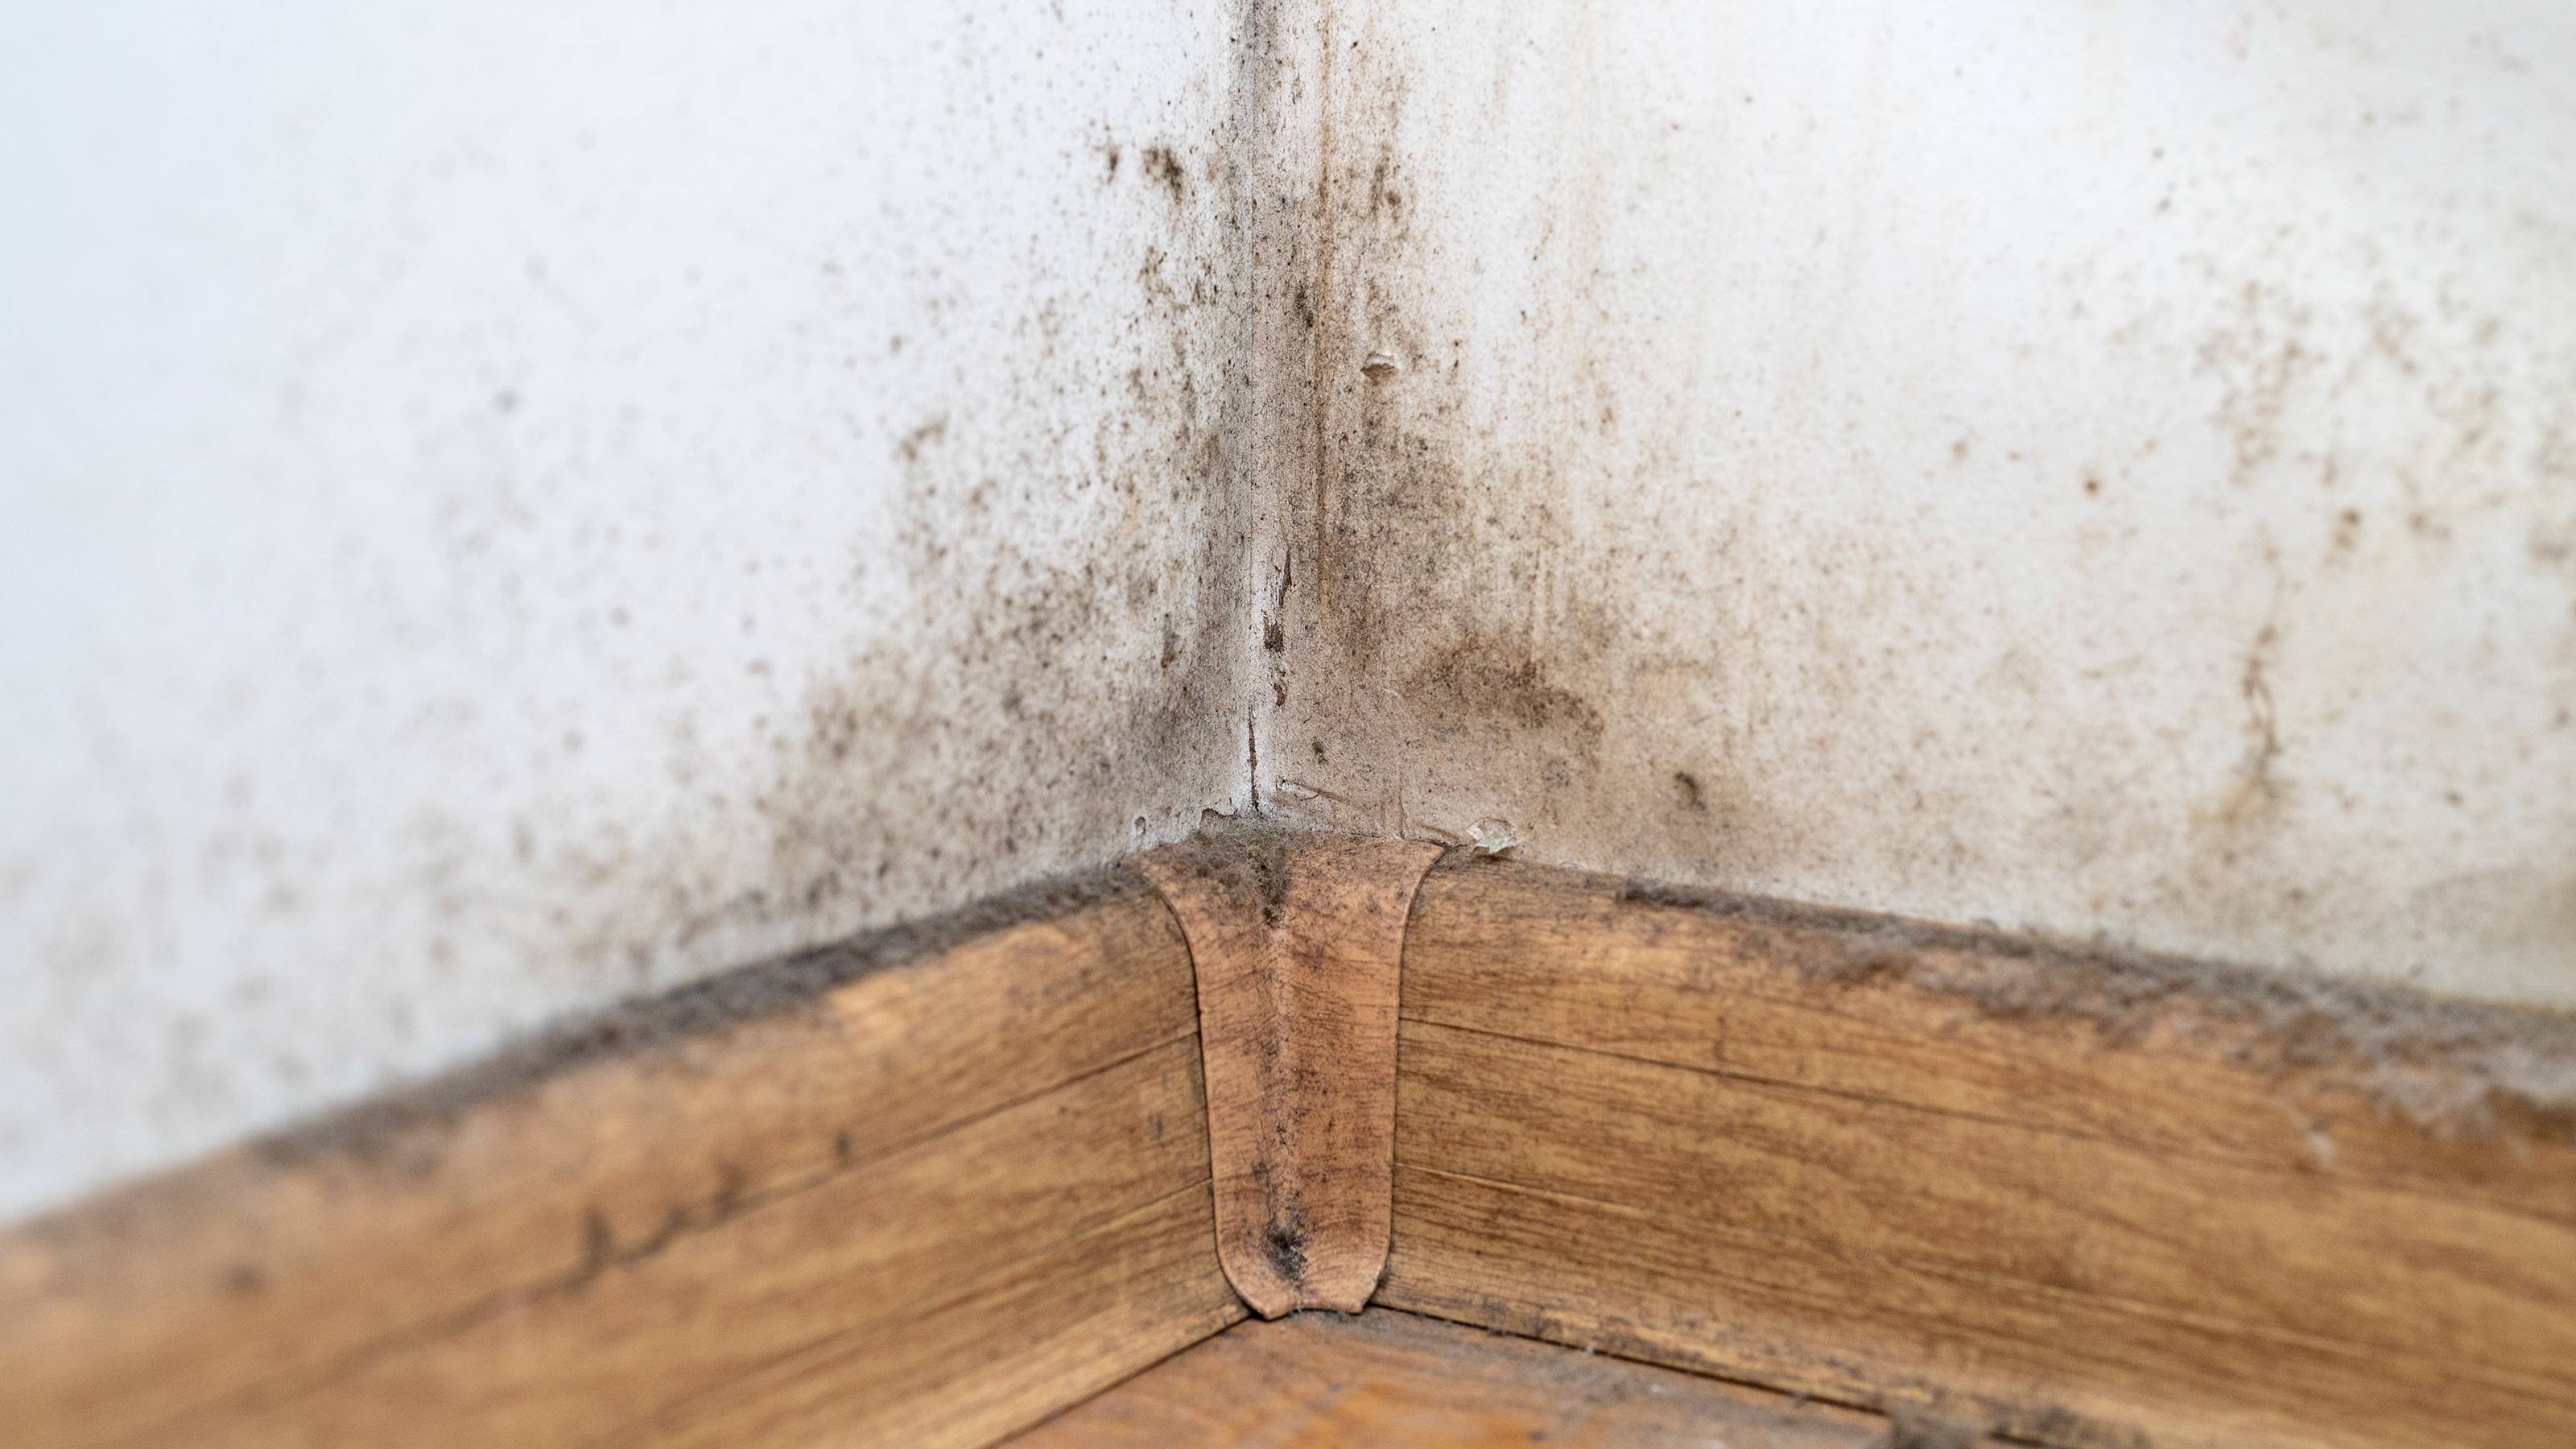 Guide to Mobile Home Skirting Repair and Maintenance